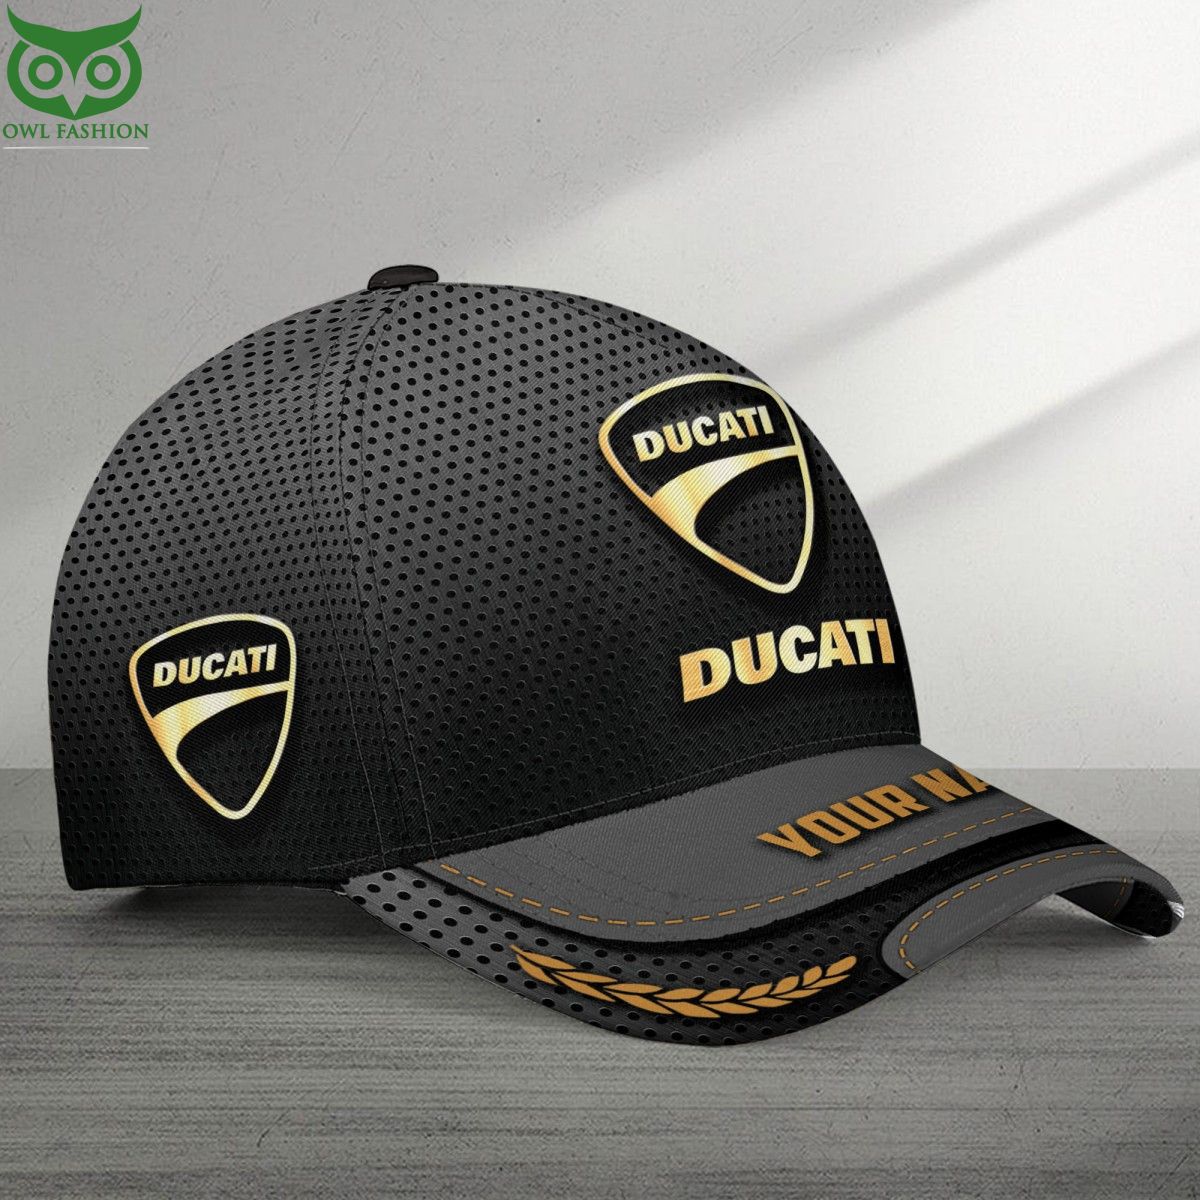 Ducatti Motor Design New Classic Cap Royal Pic of yours